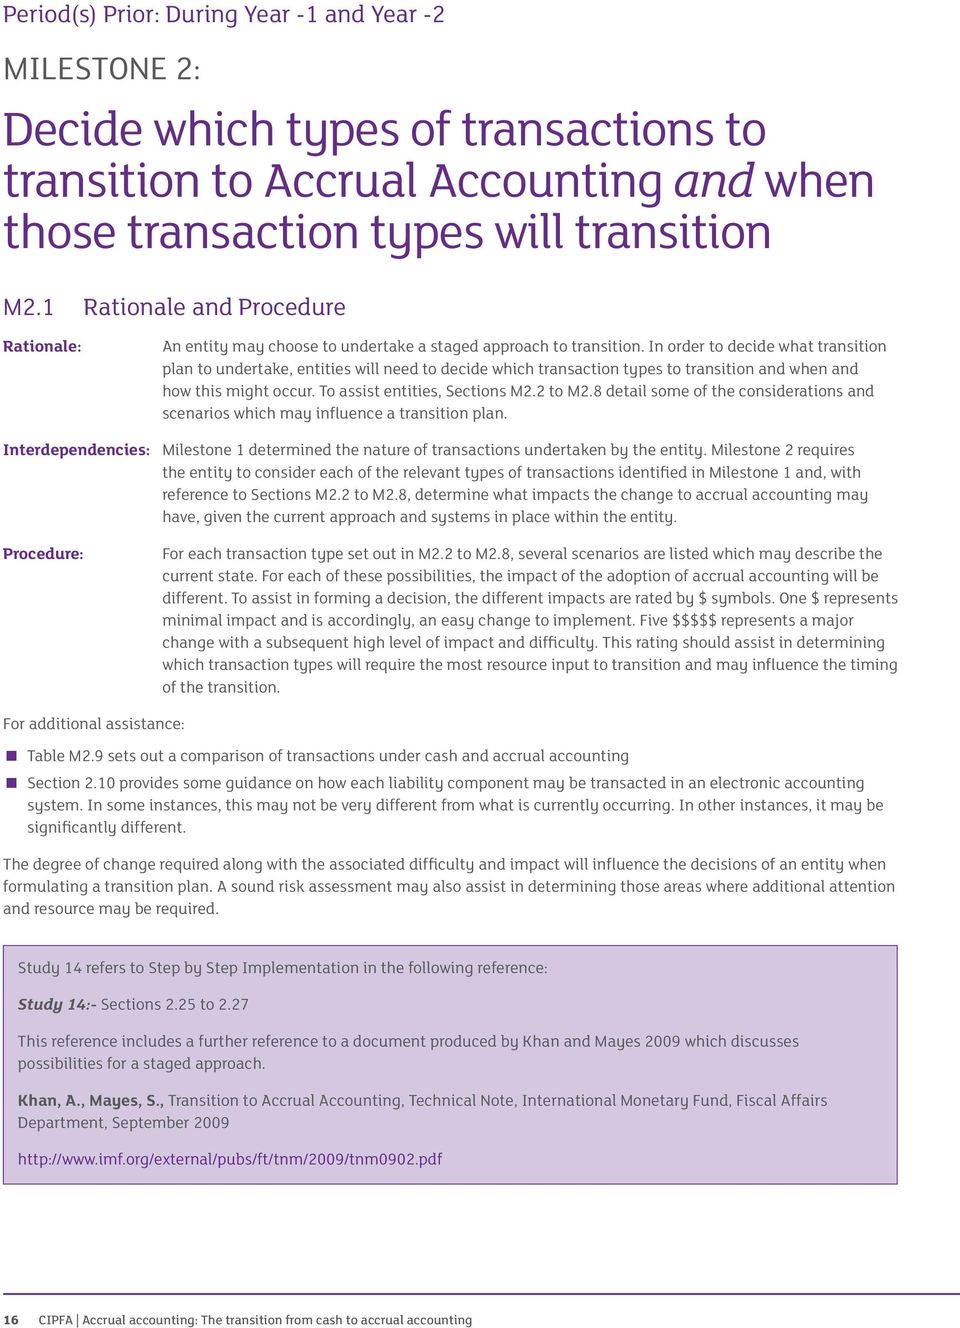 In order to decide what transition plan to undertake, entities will need to decide which transaction types to transition and when and how this might occur. To assist entities, Sections M2.2 to M2.